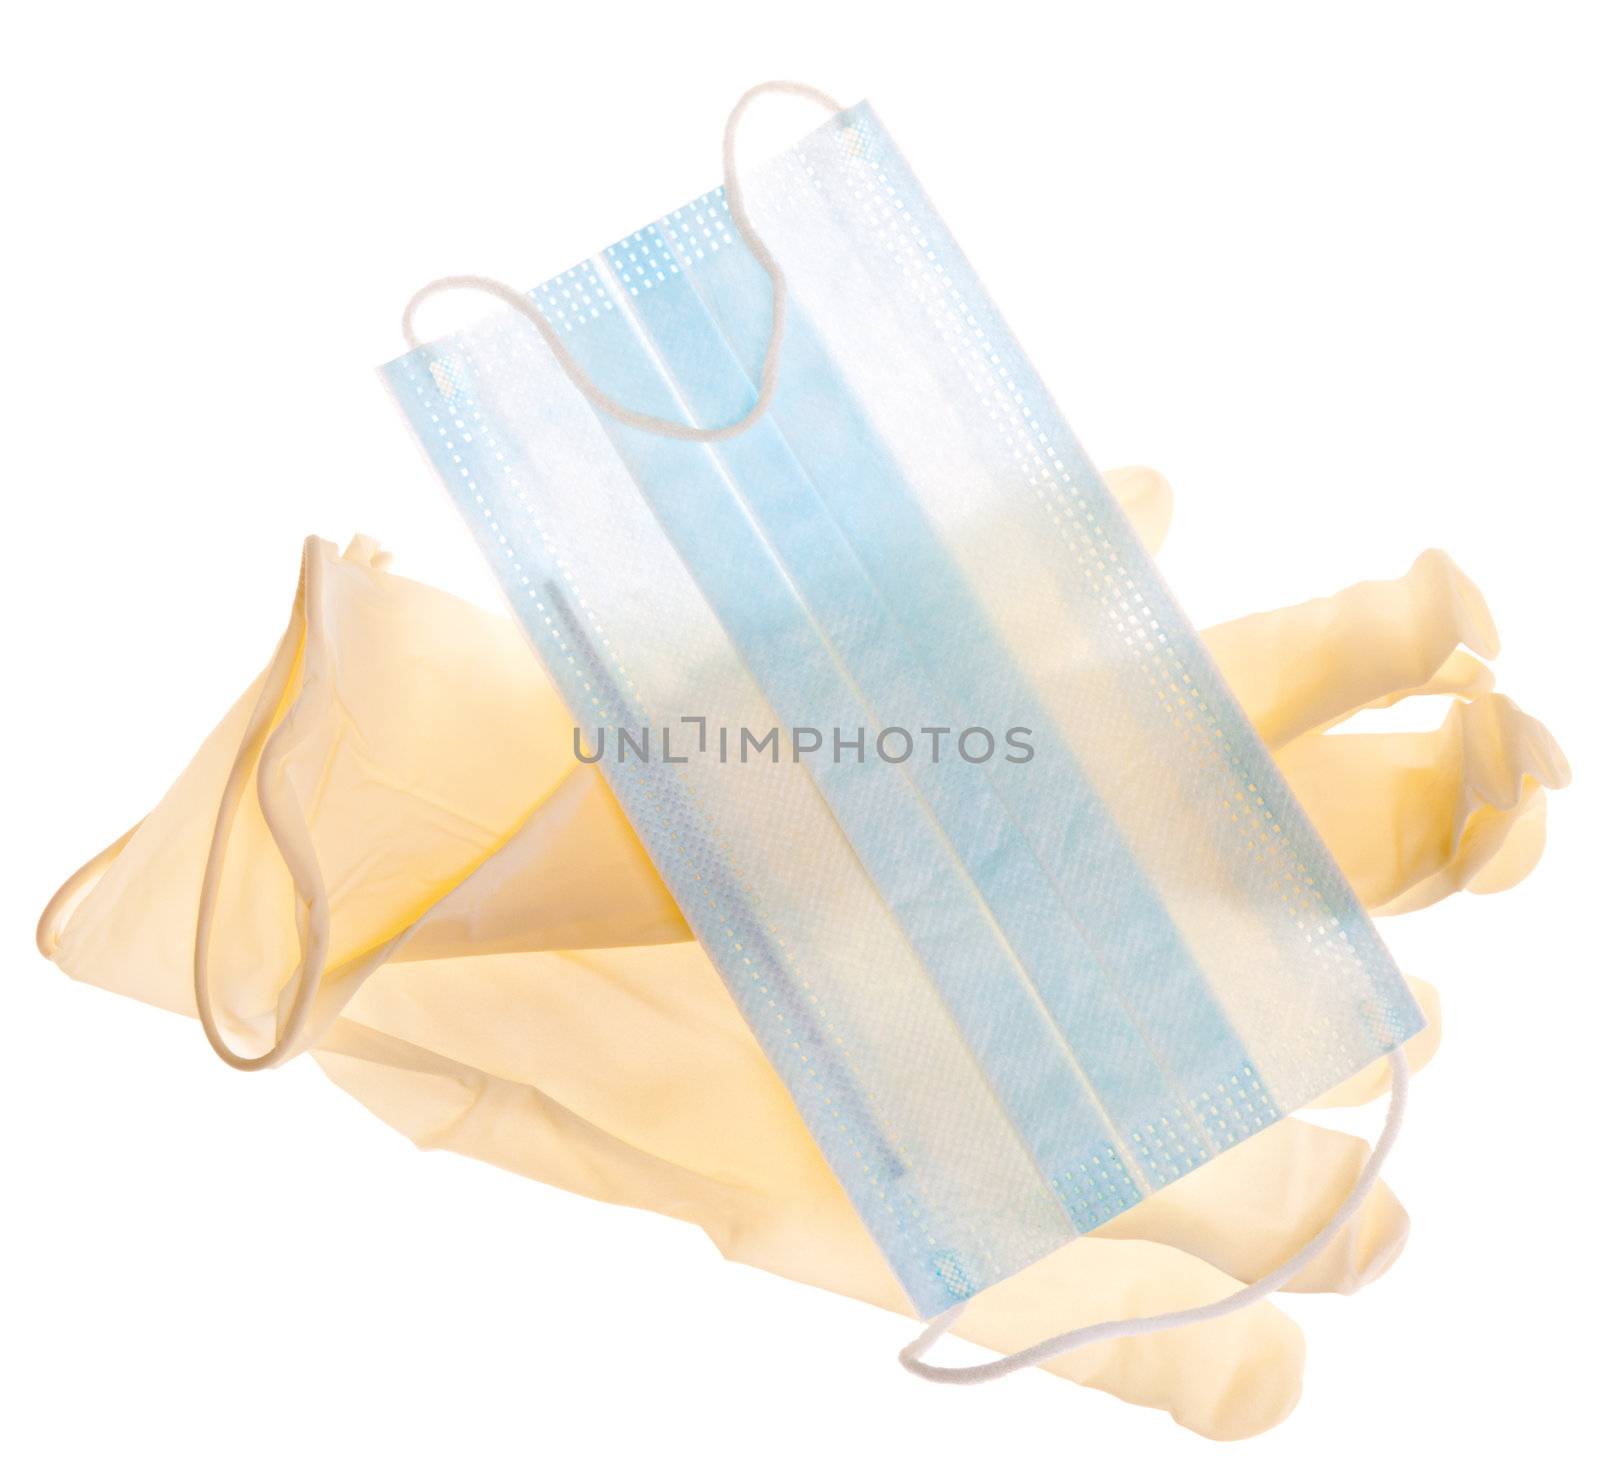 Protective medical workwear - gloves and mask isolated on white background